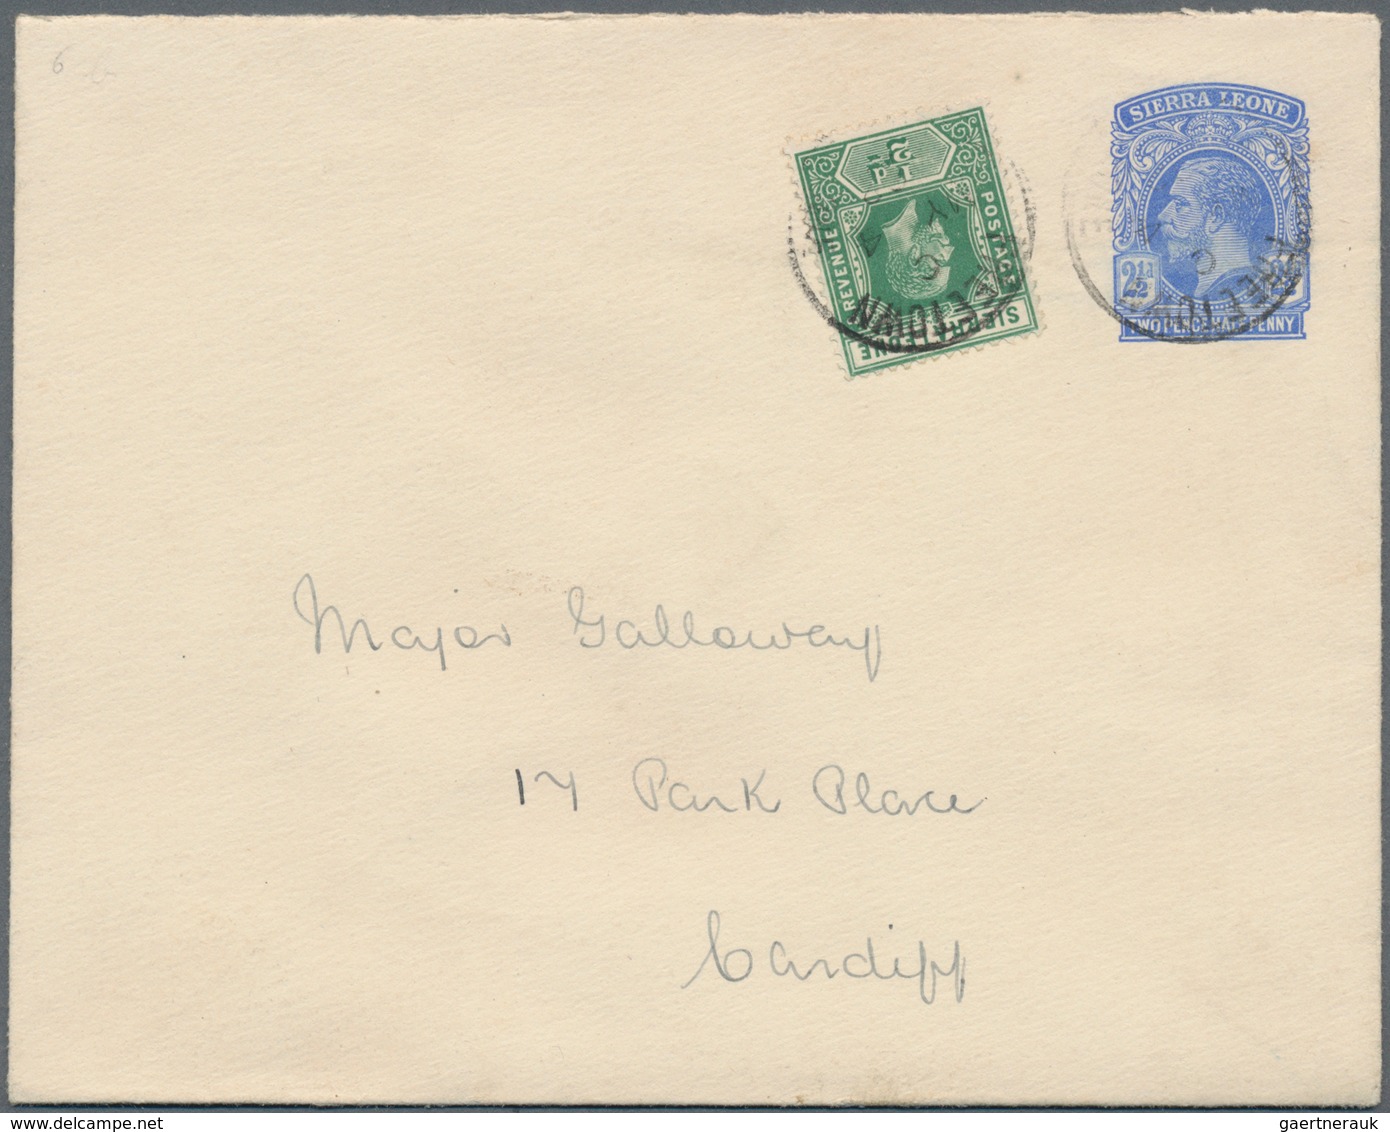 Sierra Leone: 1928 (4.5.), Stat. Envelope KGV 2½d. Ultramarine Uprated With ½d. Stamp Used From Free - Sierra Leone (1961-...)